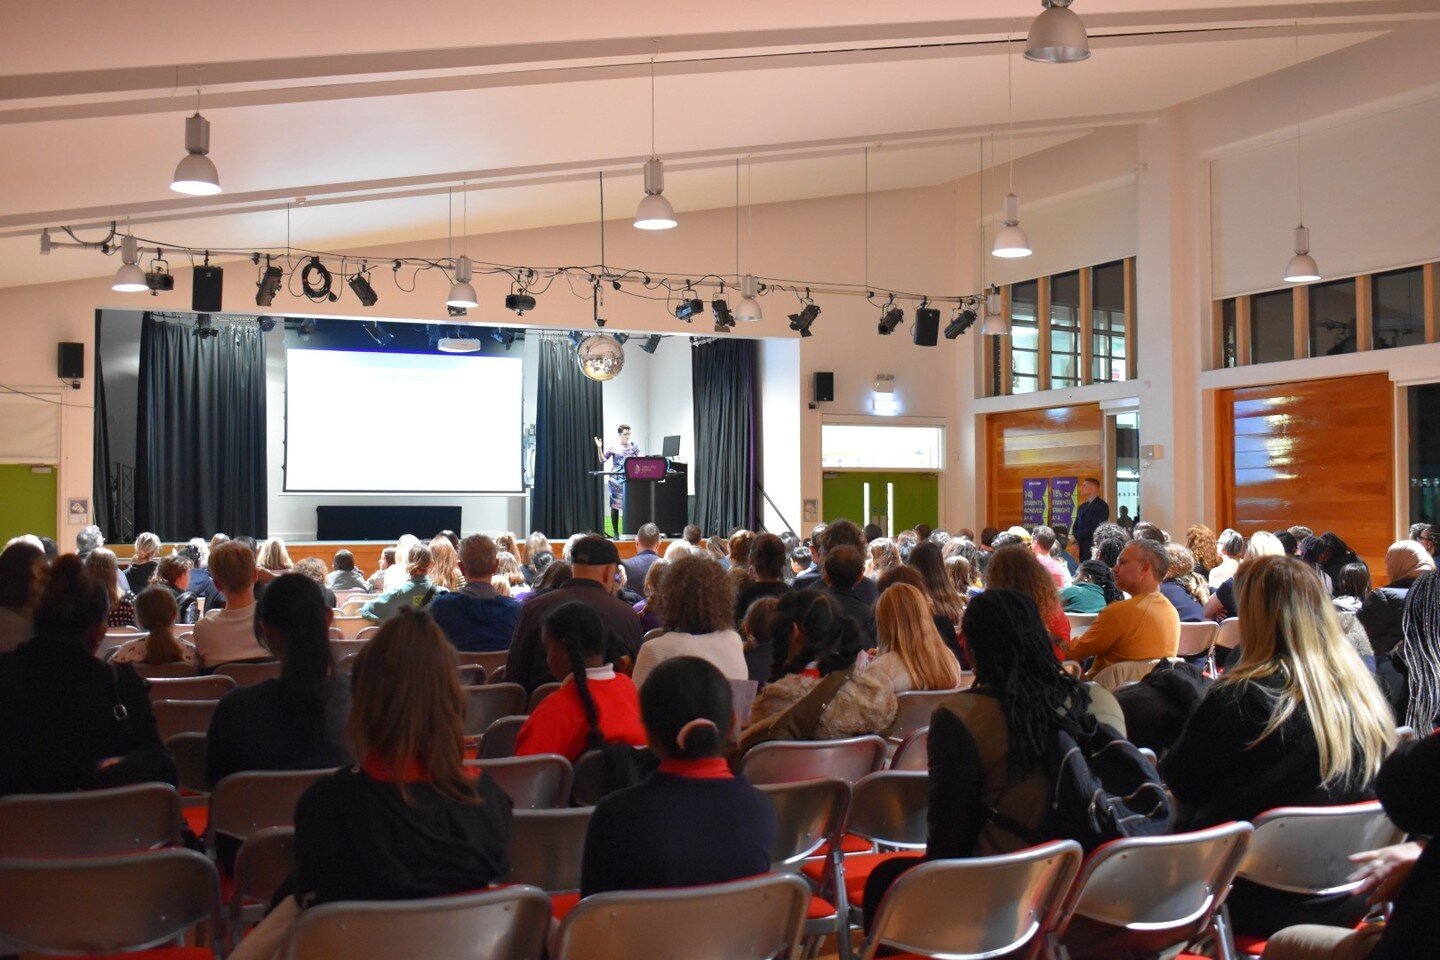 What a wonderful Open Evening we had last Thursday. It was great to see so many families joining us to discover more of what CGA has to offer students.

We have welcomed more than 1000 guests across all of our academy live events this term! - Thank y